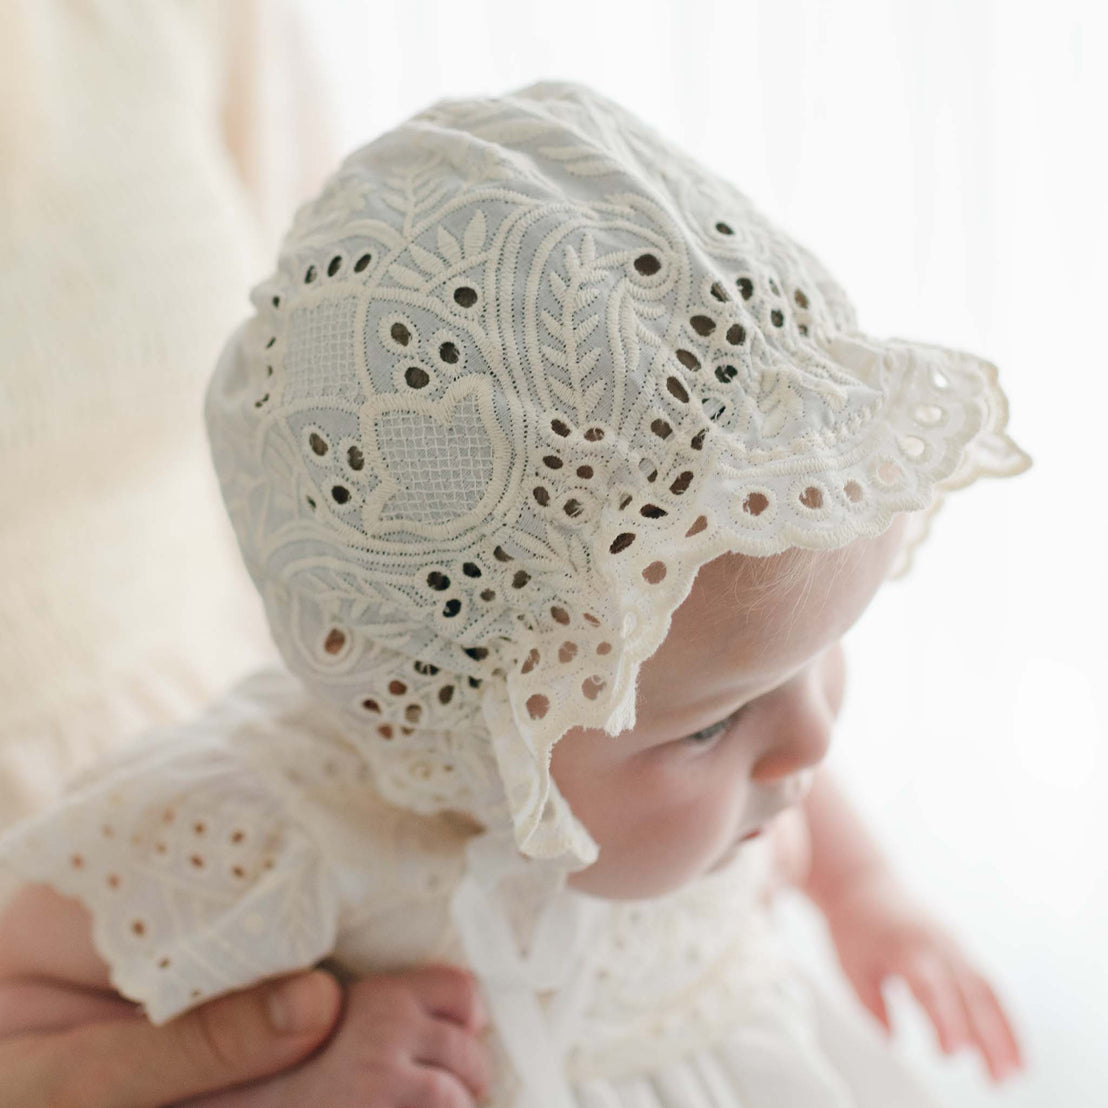 An adult holds a baby wearing an intricately patterned bonnet and a matching outfit. The white bonnet, part of the lovely Ingrid Tiered Gown & Bonnet handmade in the USA, features lace and embroidery details. The baby is looking slightly downward and to the side. The background is softly lit, emphasizing the delicate attire.